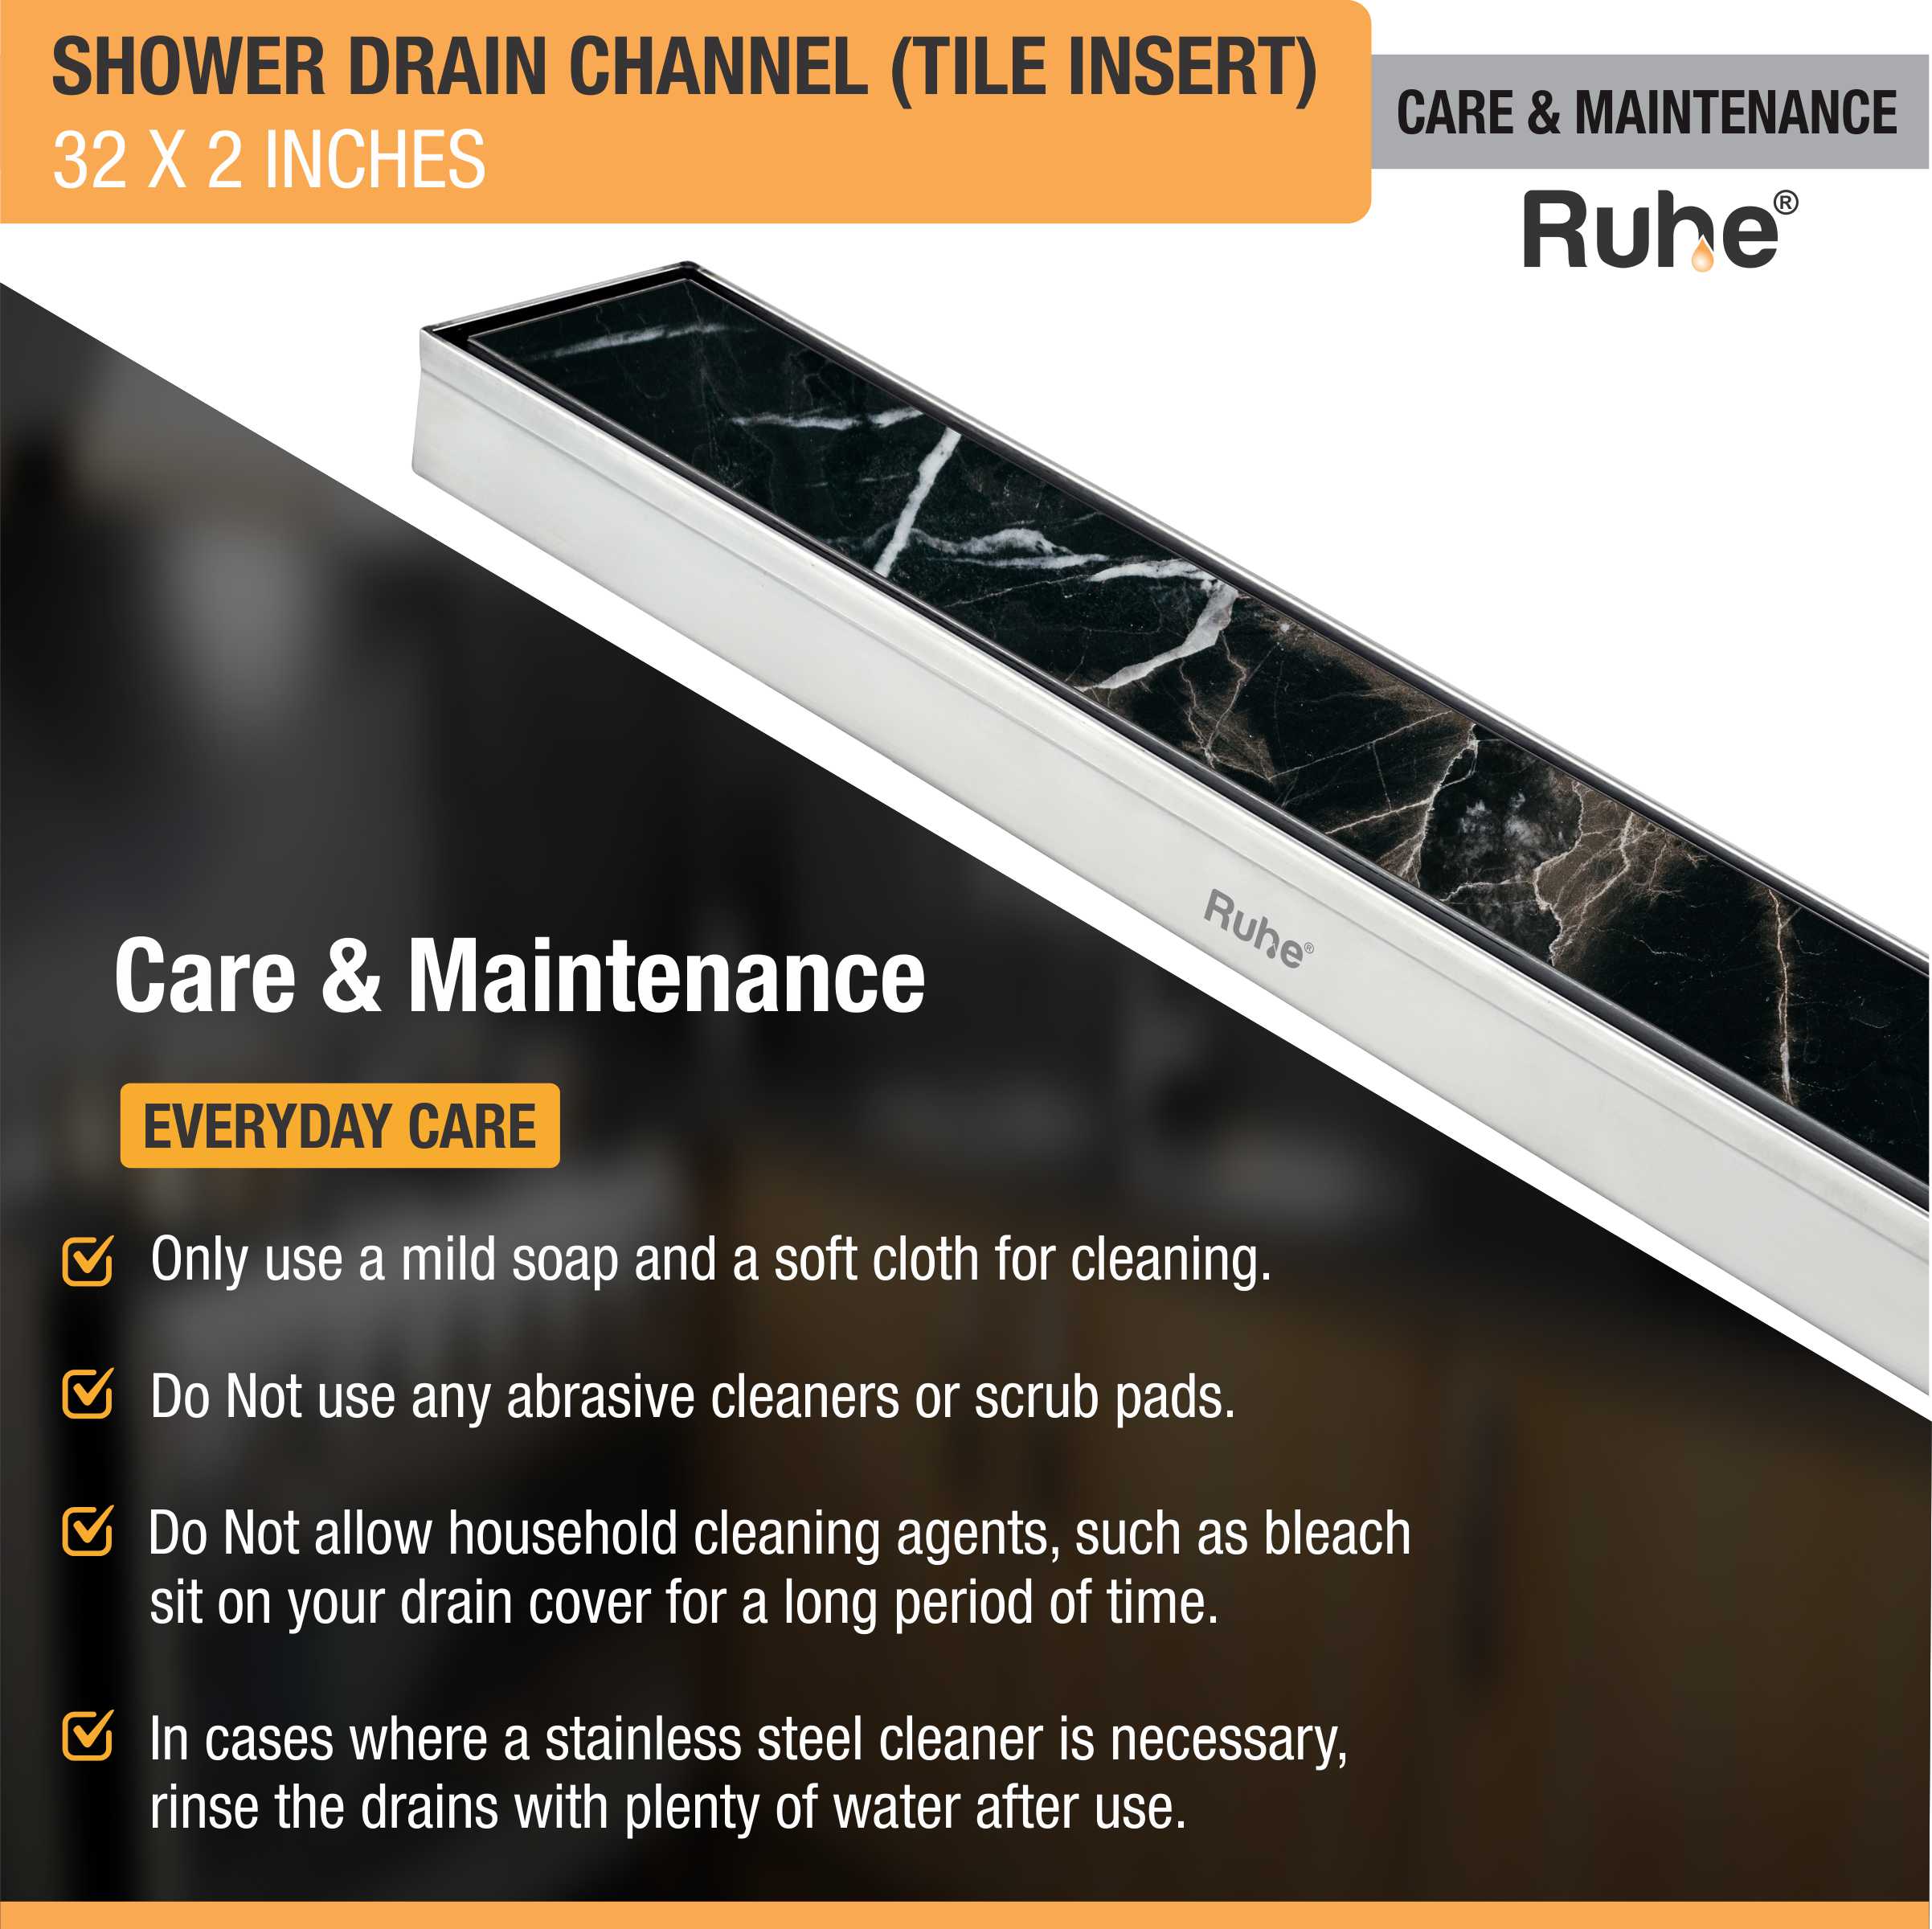 Tile Insert Shower Drain Channel (32 x 2 Inches) (304 Grade) care and maintenance